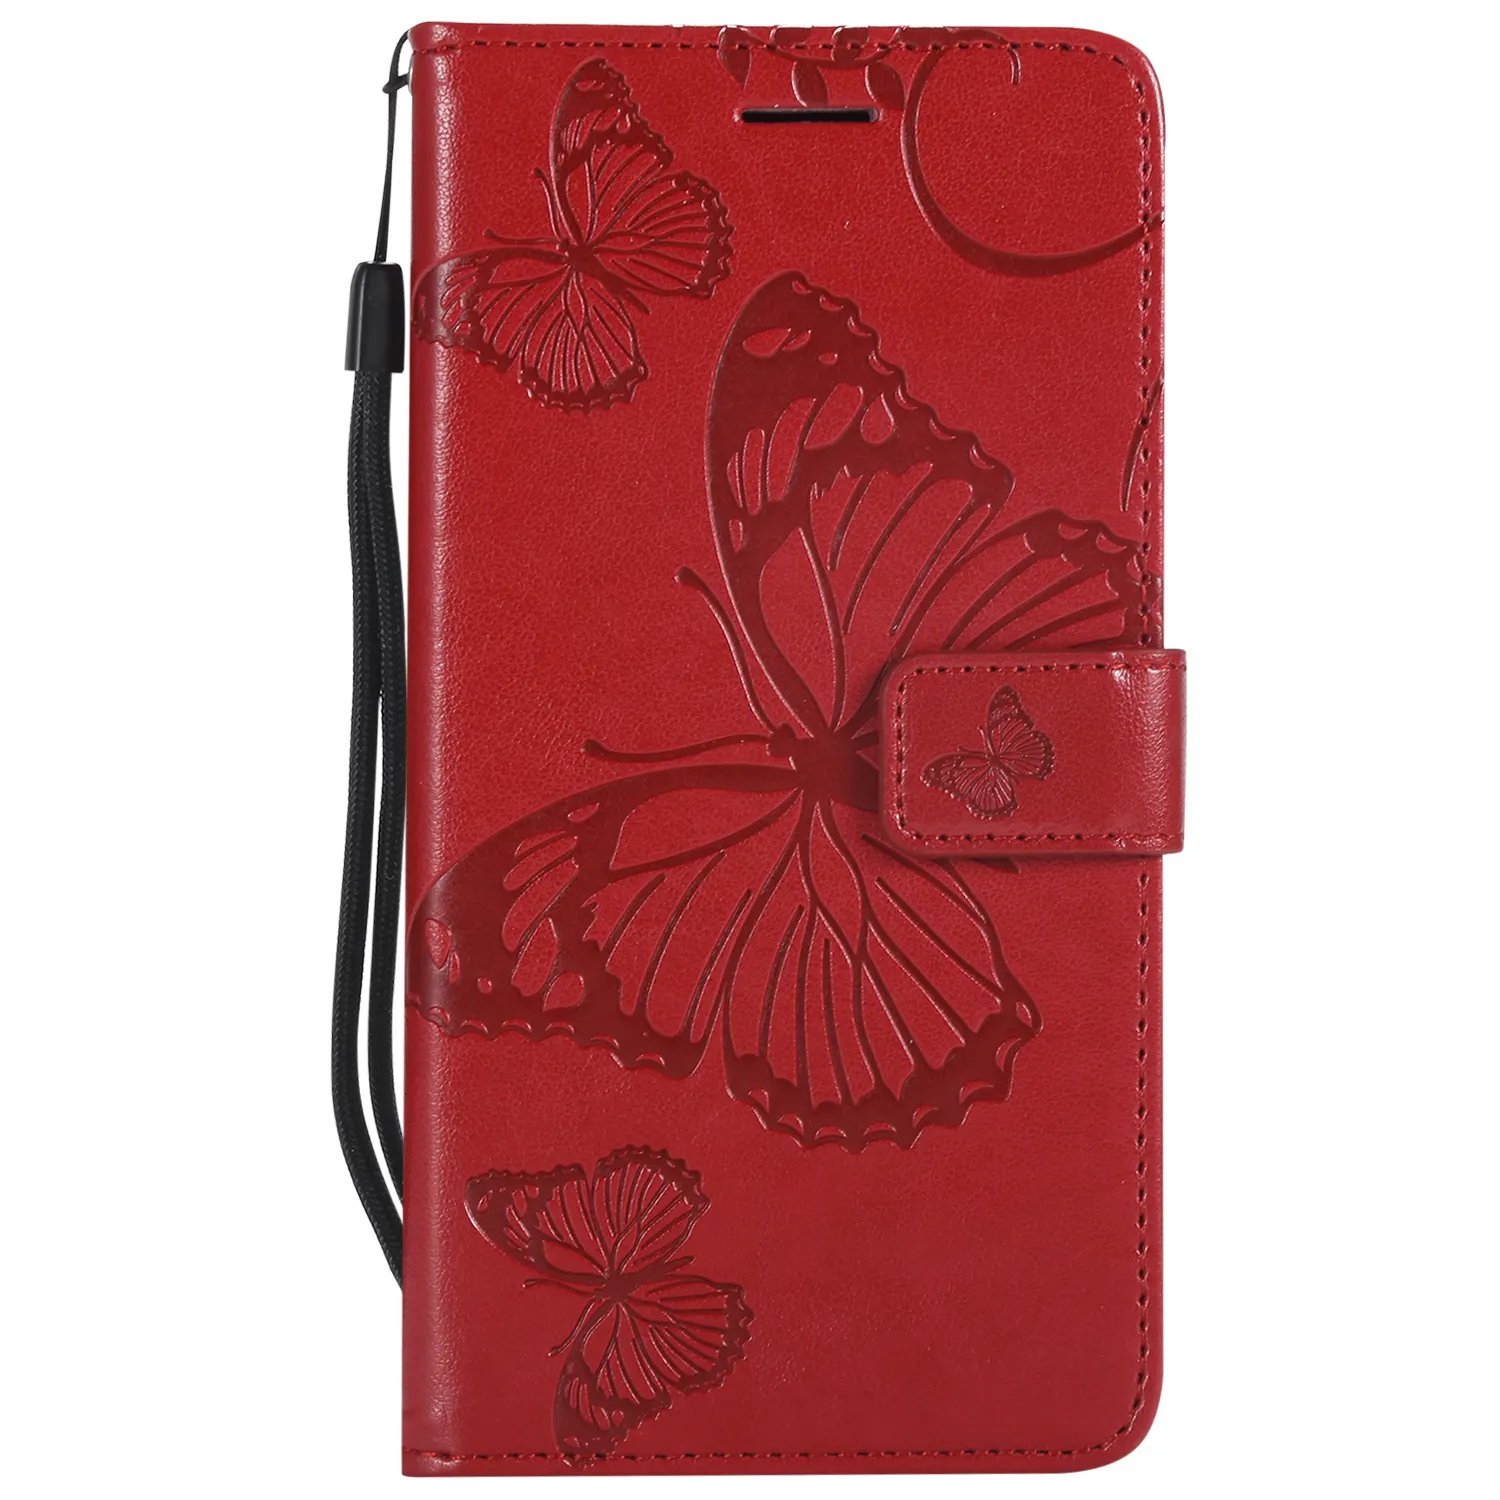 Butterfly Pattern Case For huawei Y5 Y6 Y7 Prime pro 2018 2017 2019 Case Back Cover Wallet Leather mobile phone cases A6503